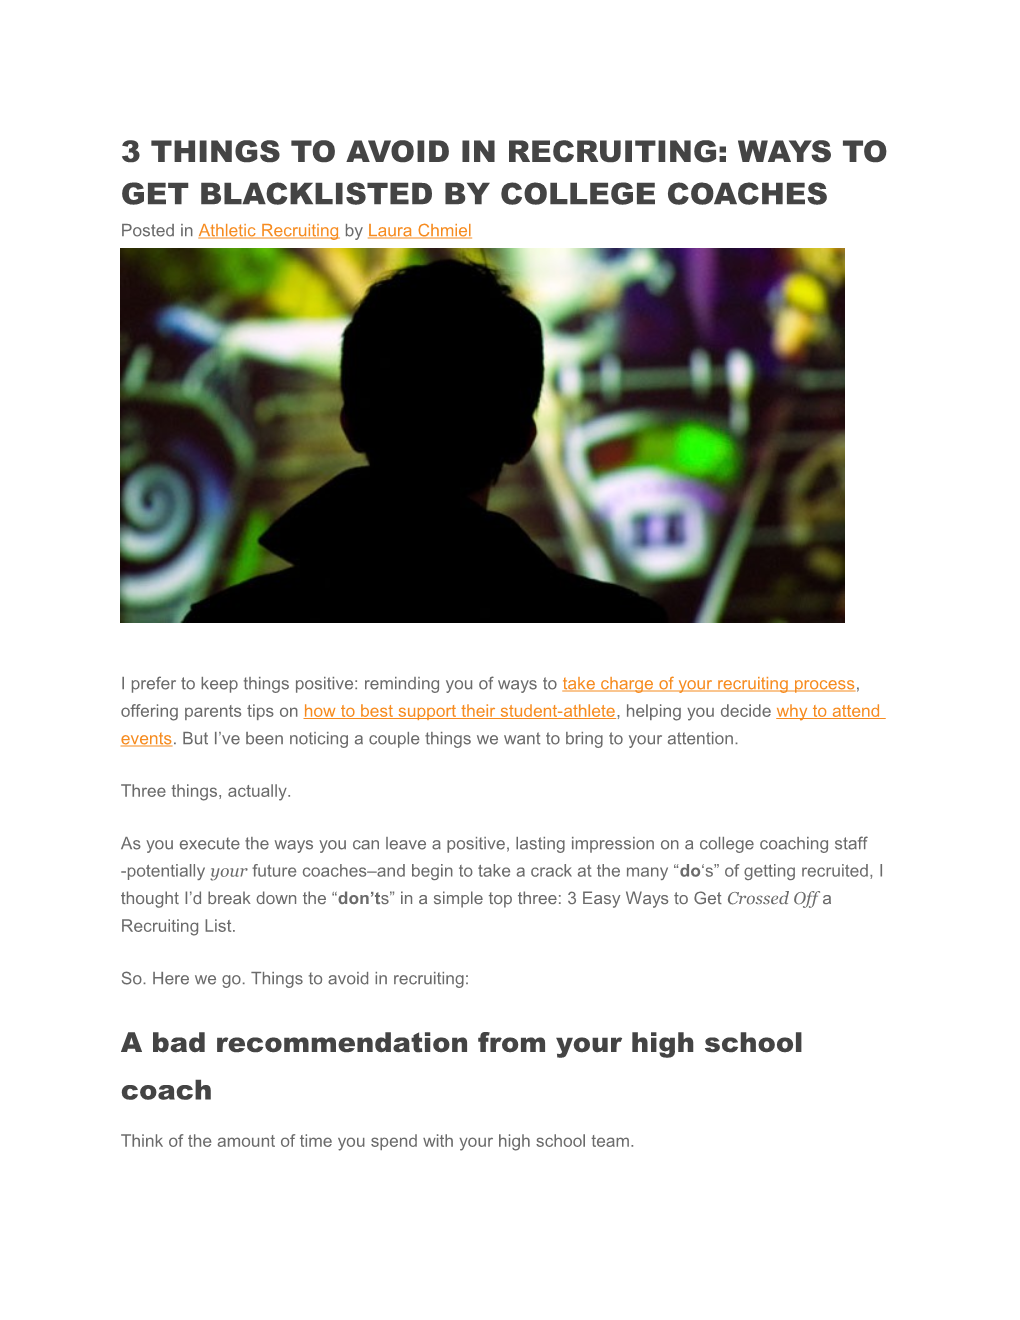 3 Things to Avoid in Recruiting: Ways to Get Blacklisted by College Coaches